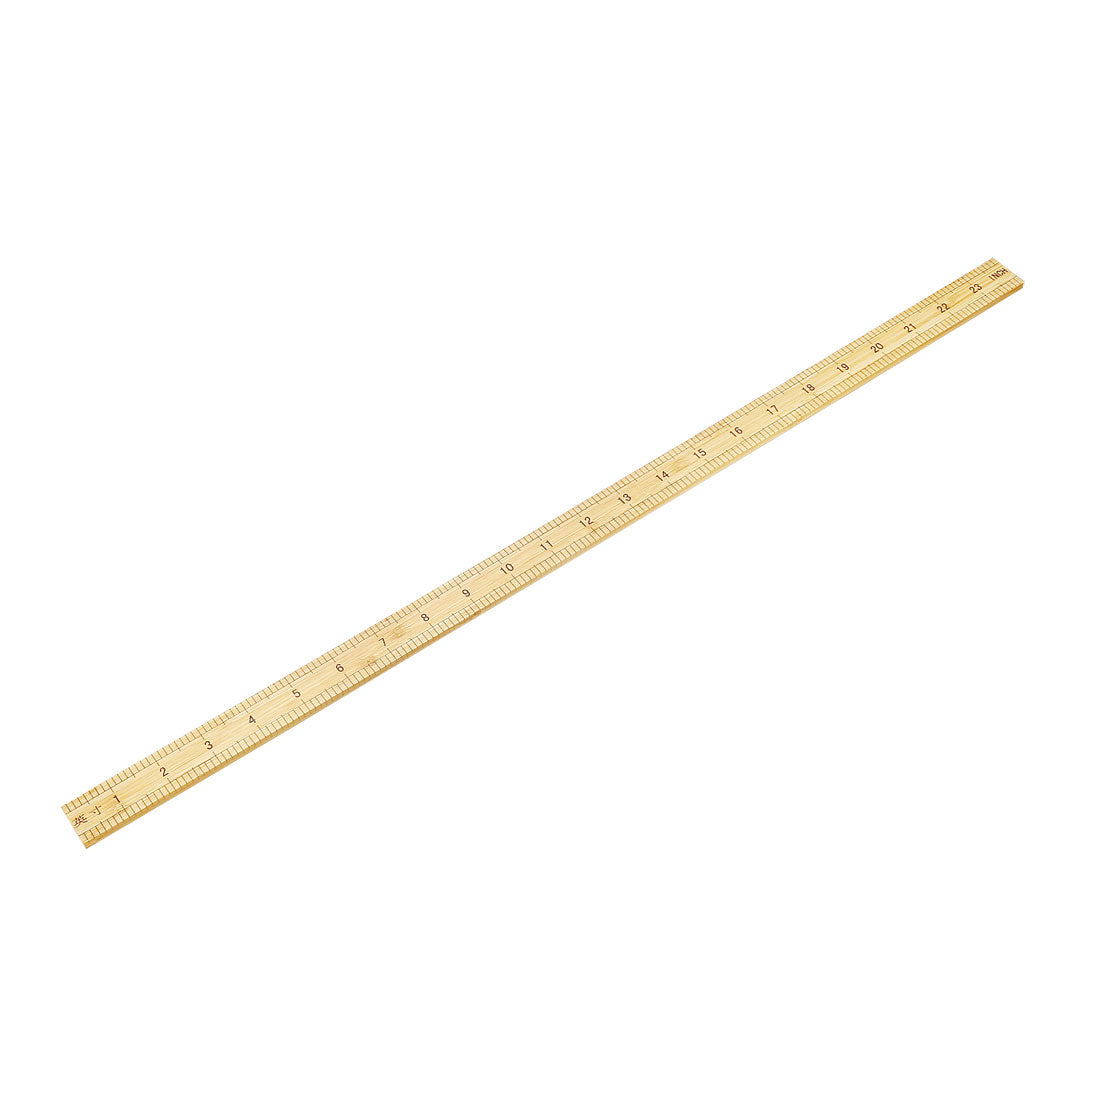 uxcell Uxcell Straight Ruler 600mm 24 Inch Metric Measuring Tool Bamboo